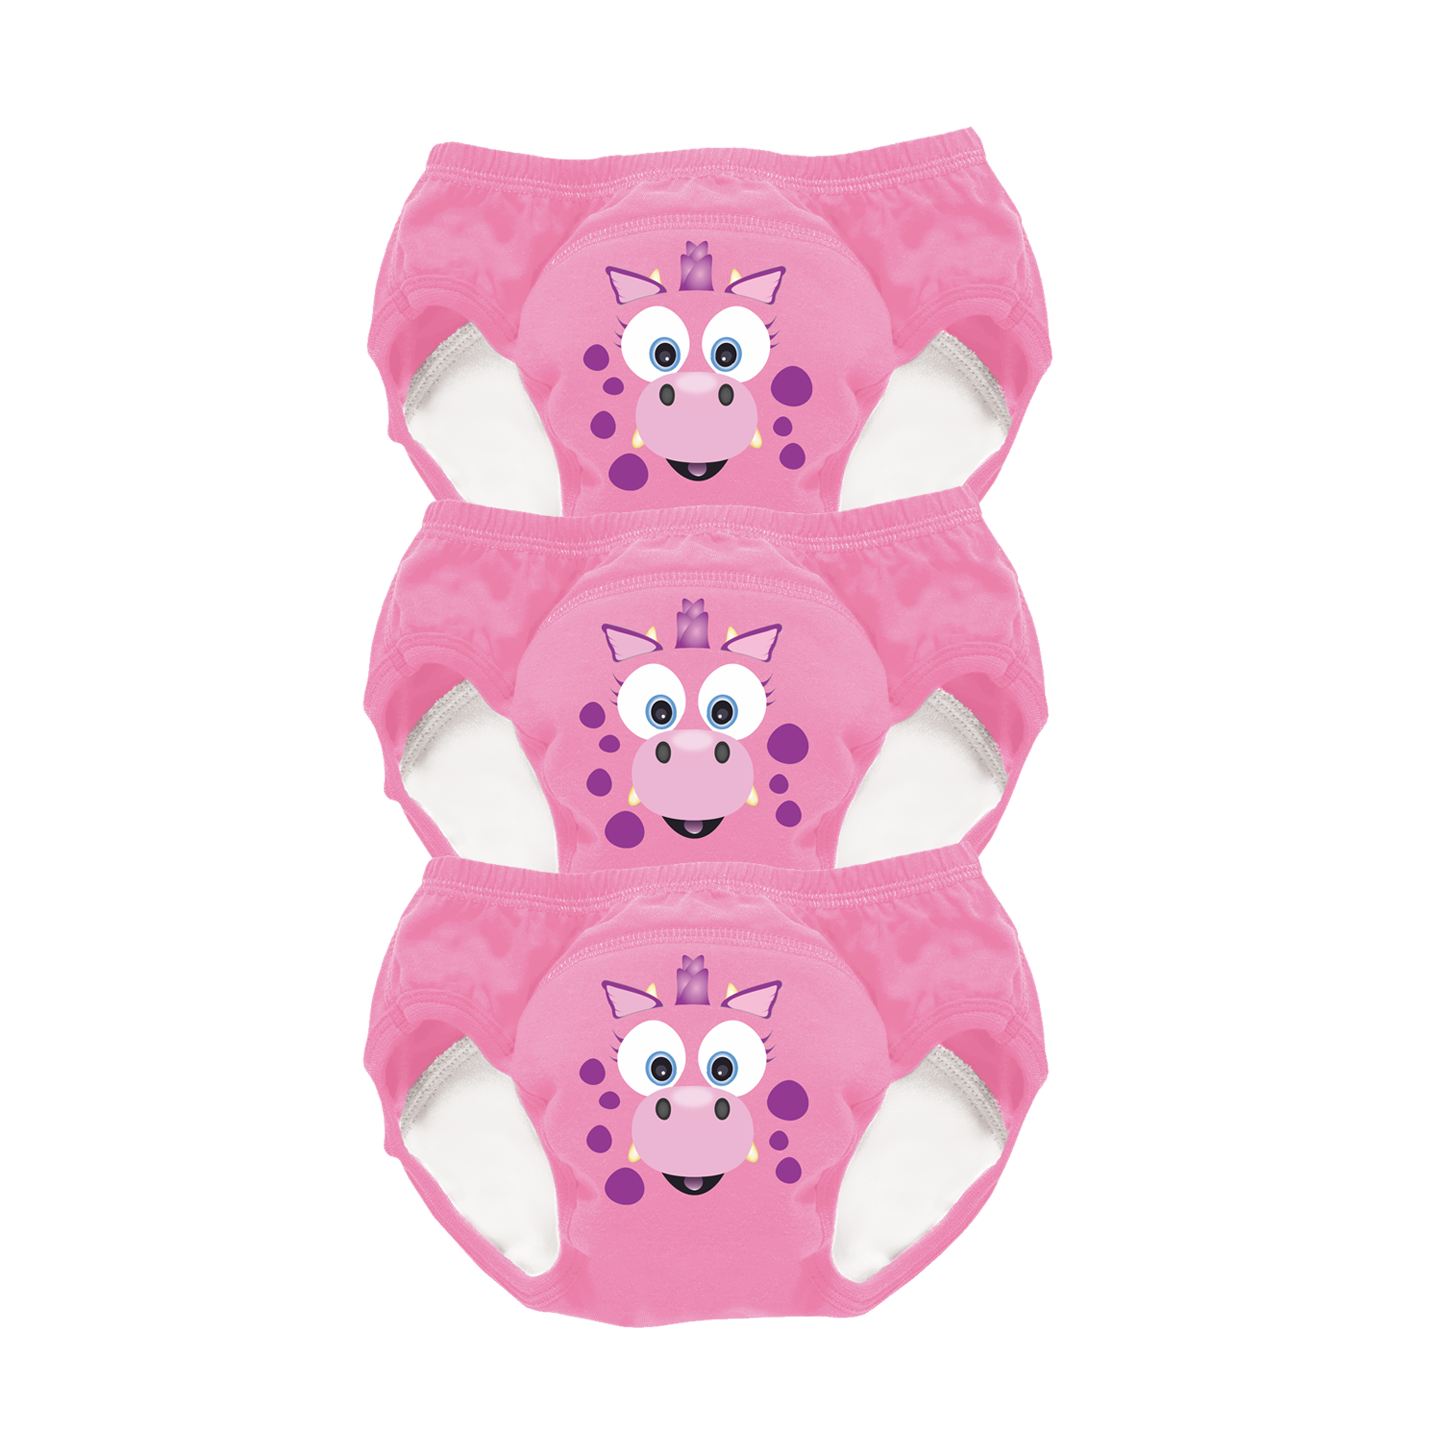 My Little Training Pants (Pack of 3) - Pink Dragon